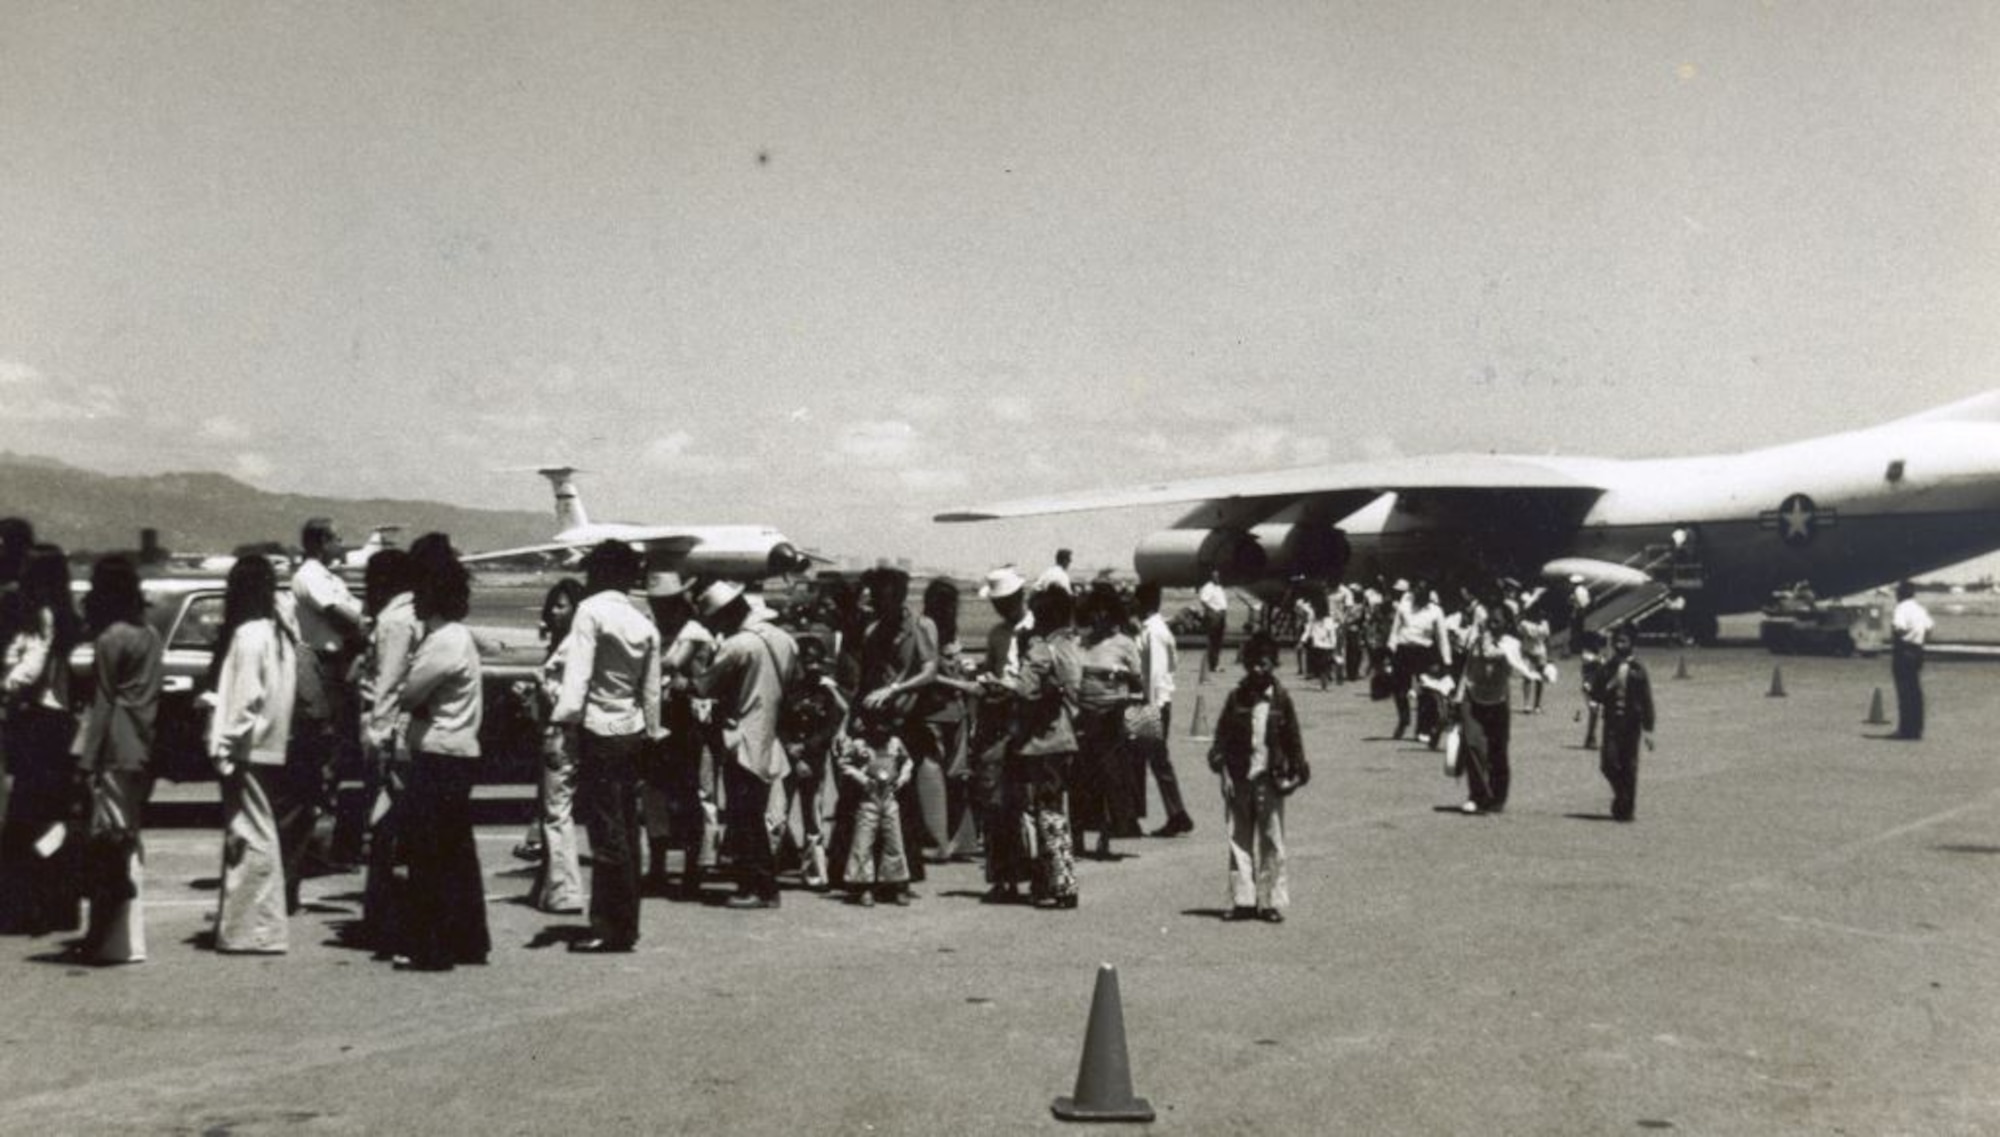 Refugees fleeing South Vietnam in 1975 streamed across the flightline on Hickam Air Force Base, Hawaii, after arriving on C-141 aircraft during Operation New Life. Operation New Life ran from April 23- November 1, 1975, airlifting over 100,000 evacuees and refugees from South Vietnam.(U.S. Air Force photo provided by 15 WG historian office)